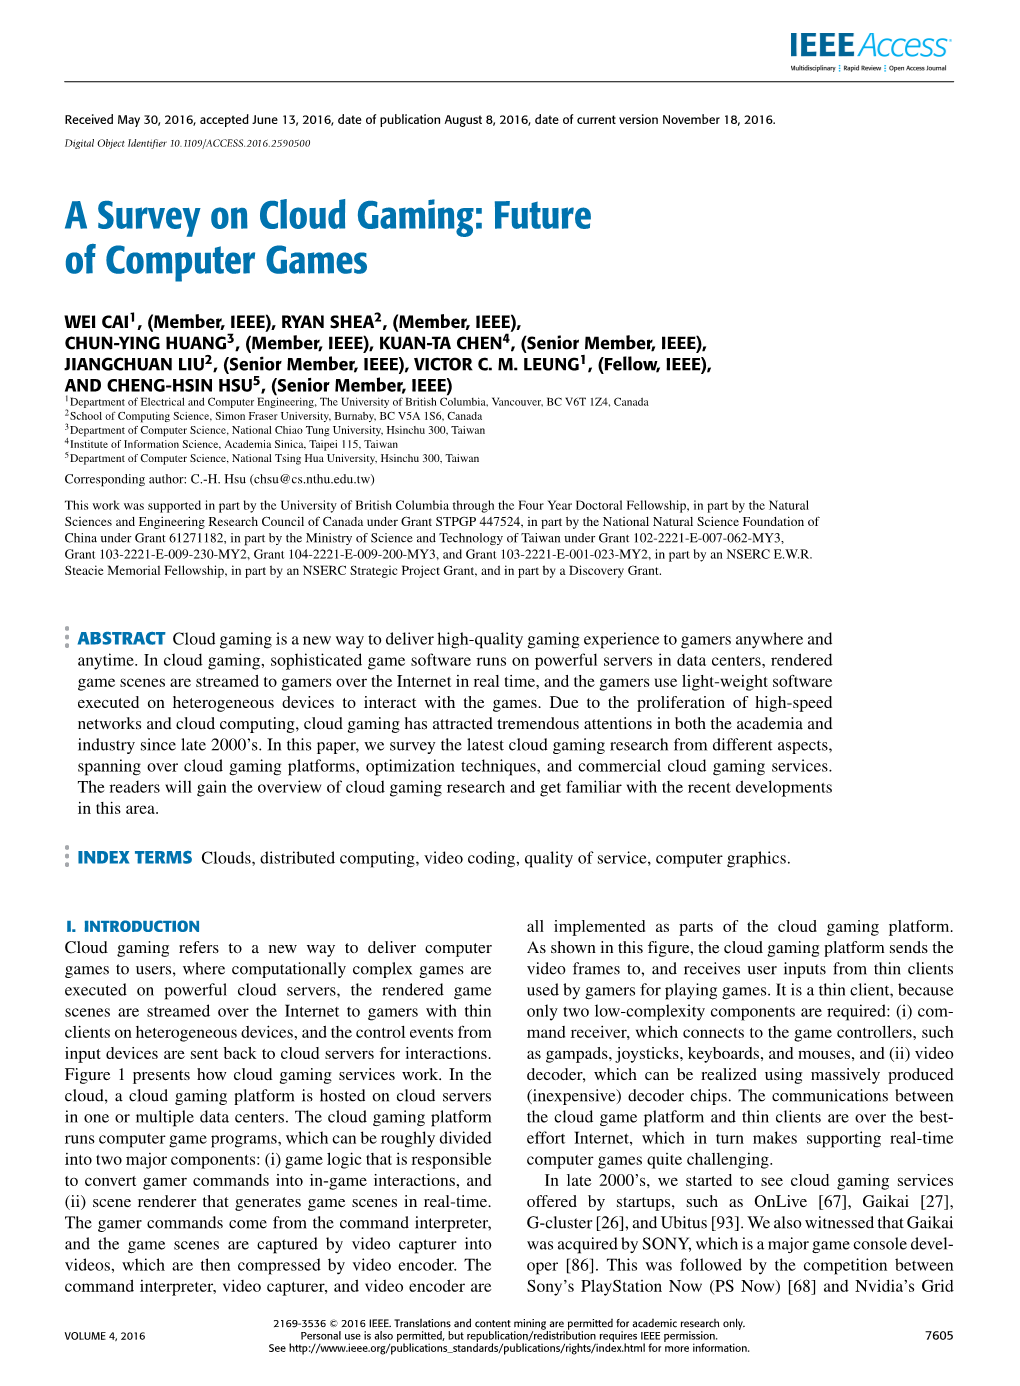 A Survey on Cloud Gaming: Future of Computer Games